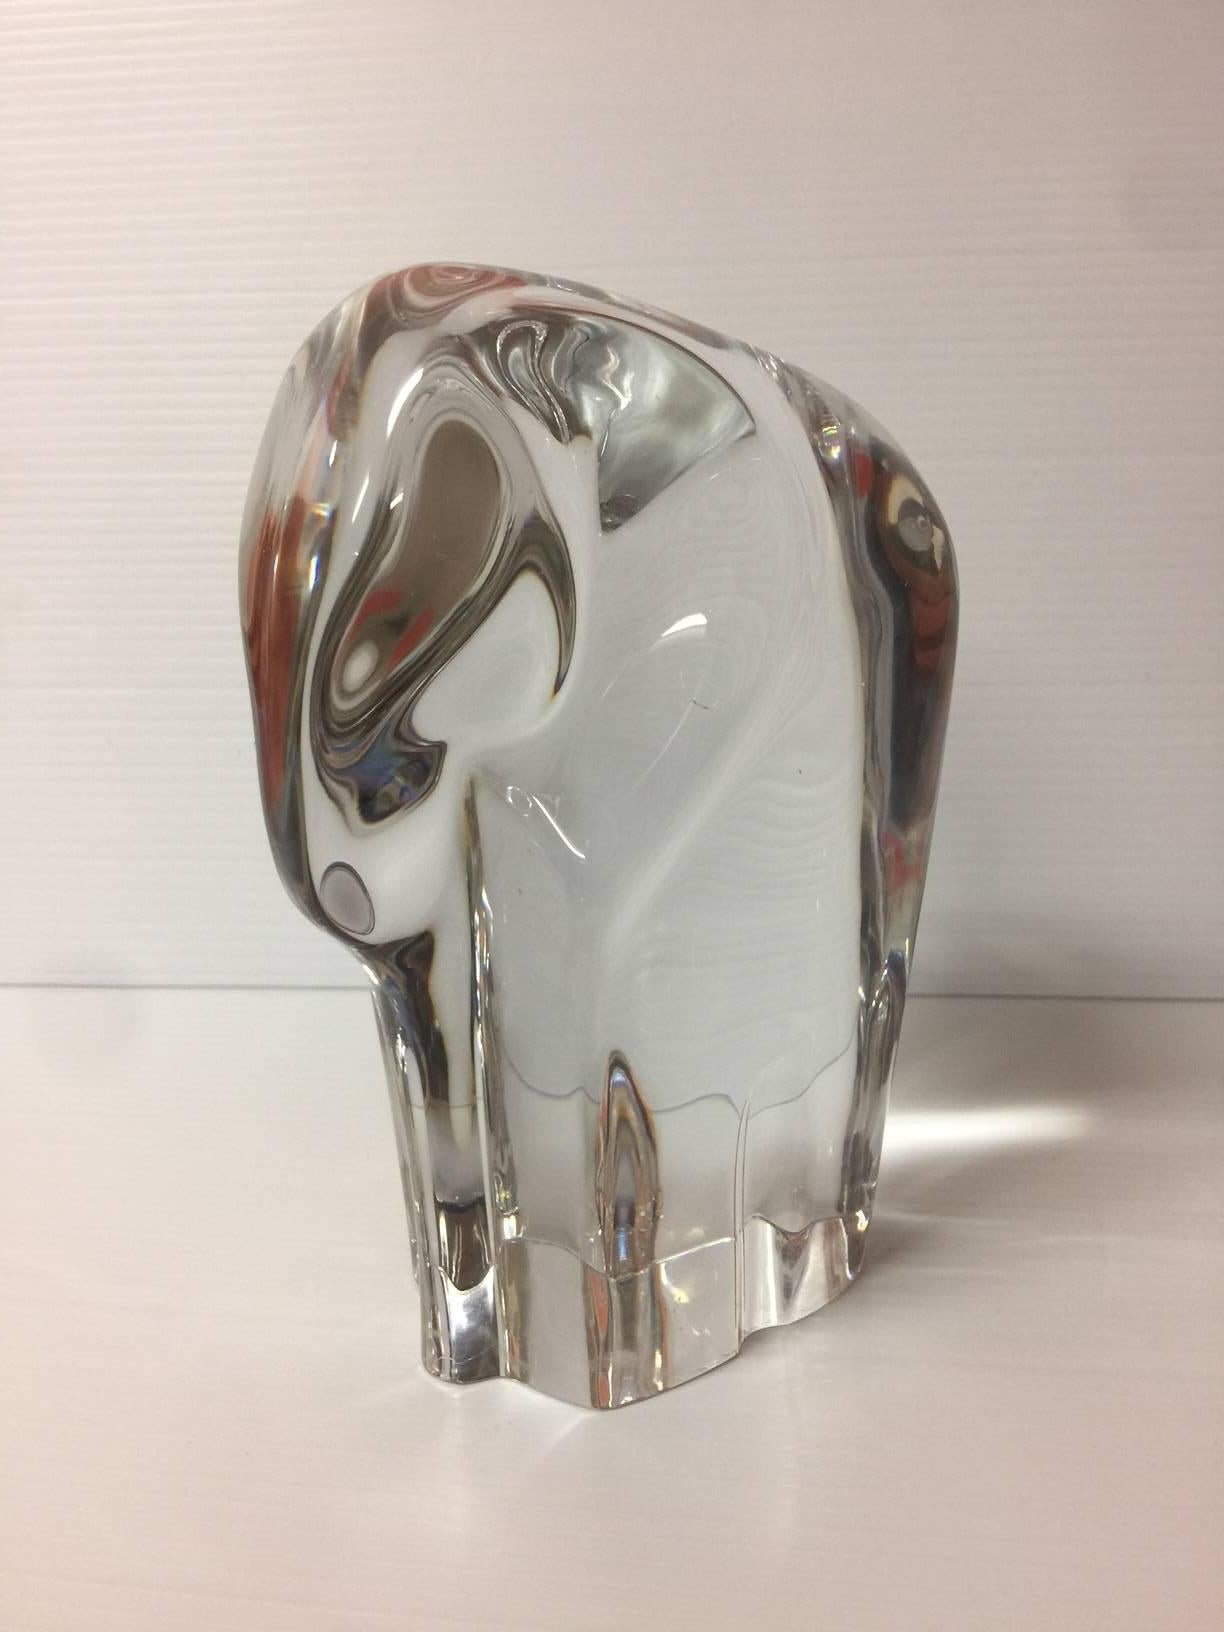 Very stylized modernist crystal elephant by Olle Alberius for Orrefors, circa 1970s. Signed and numbered a very cool piece!